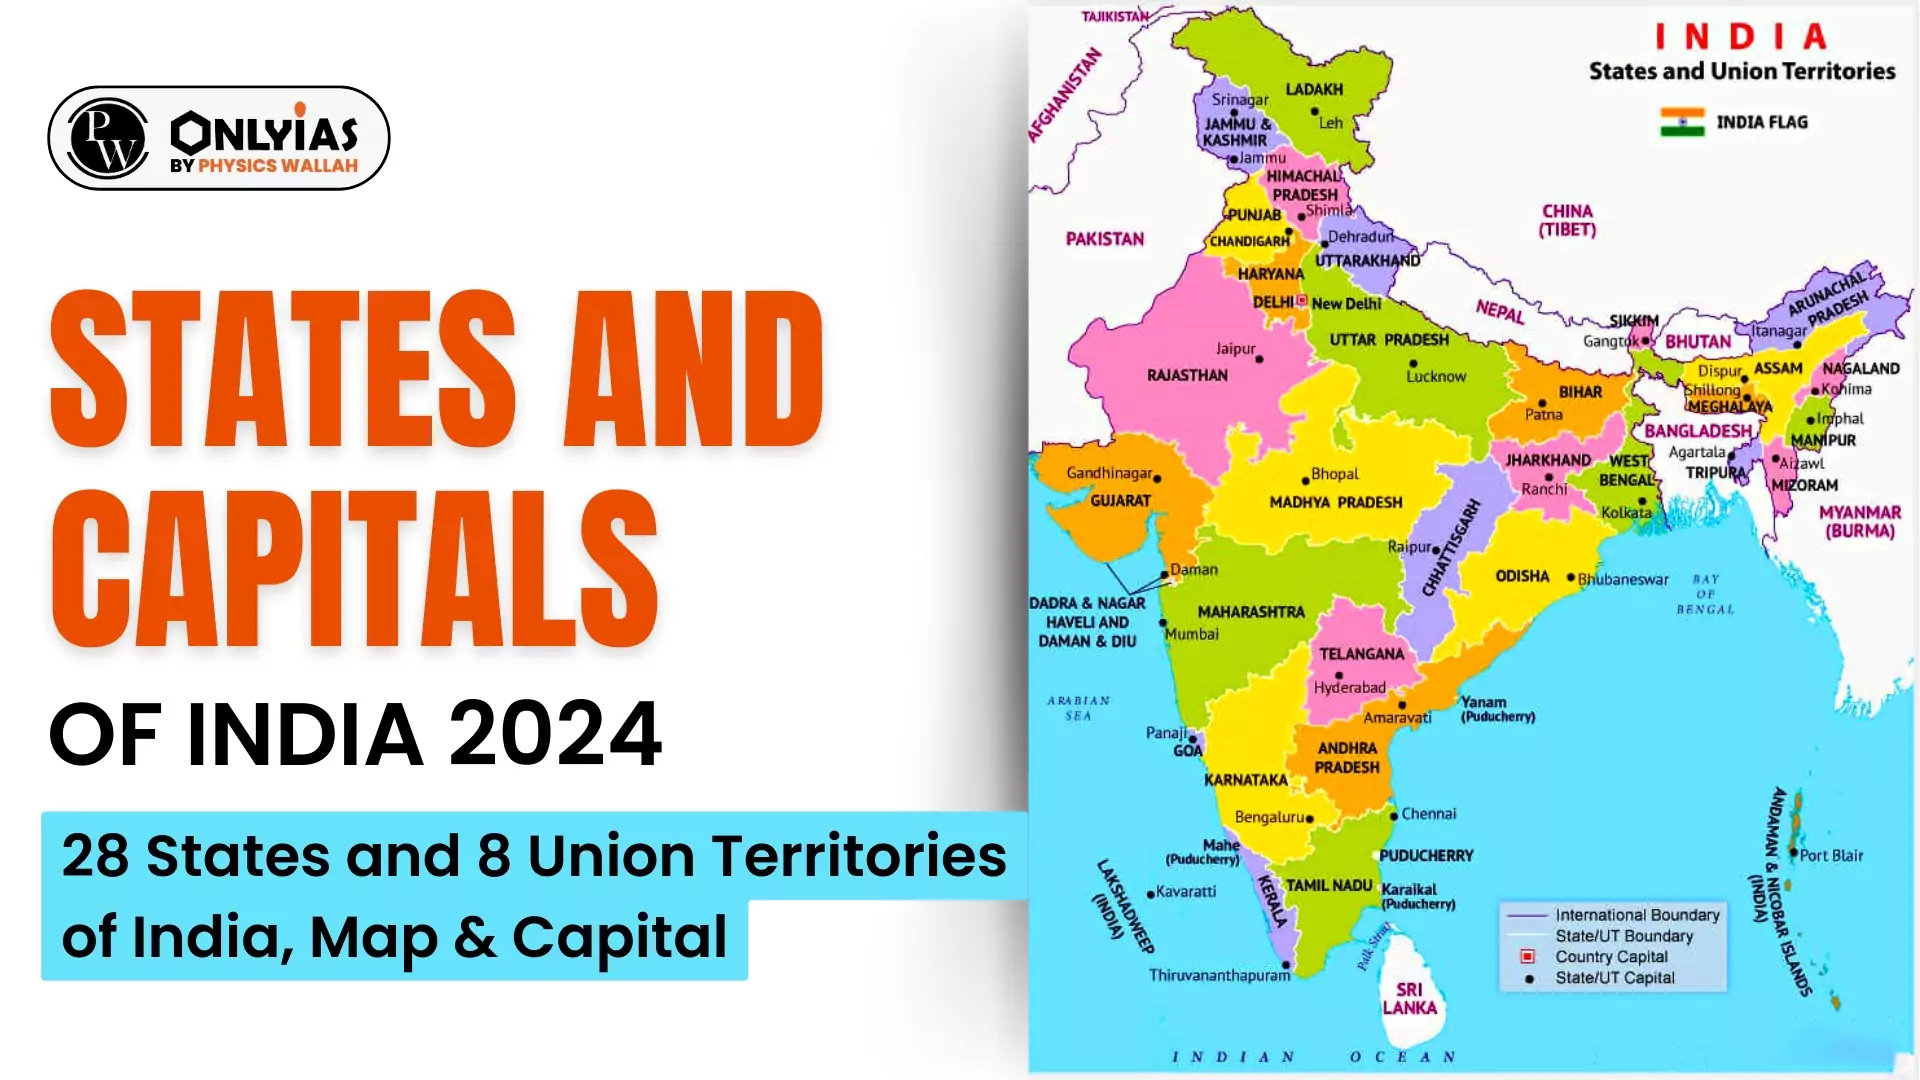 States And Capitals Of India List 2023 28 States And 8 UT 2023